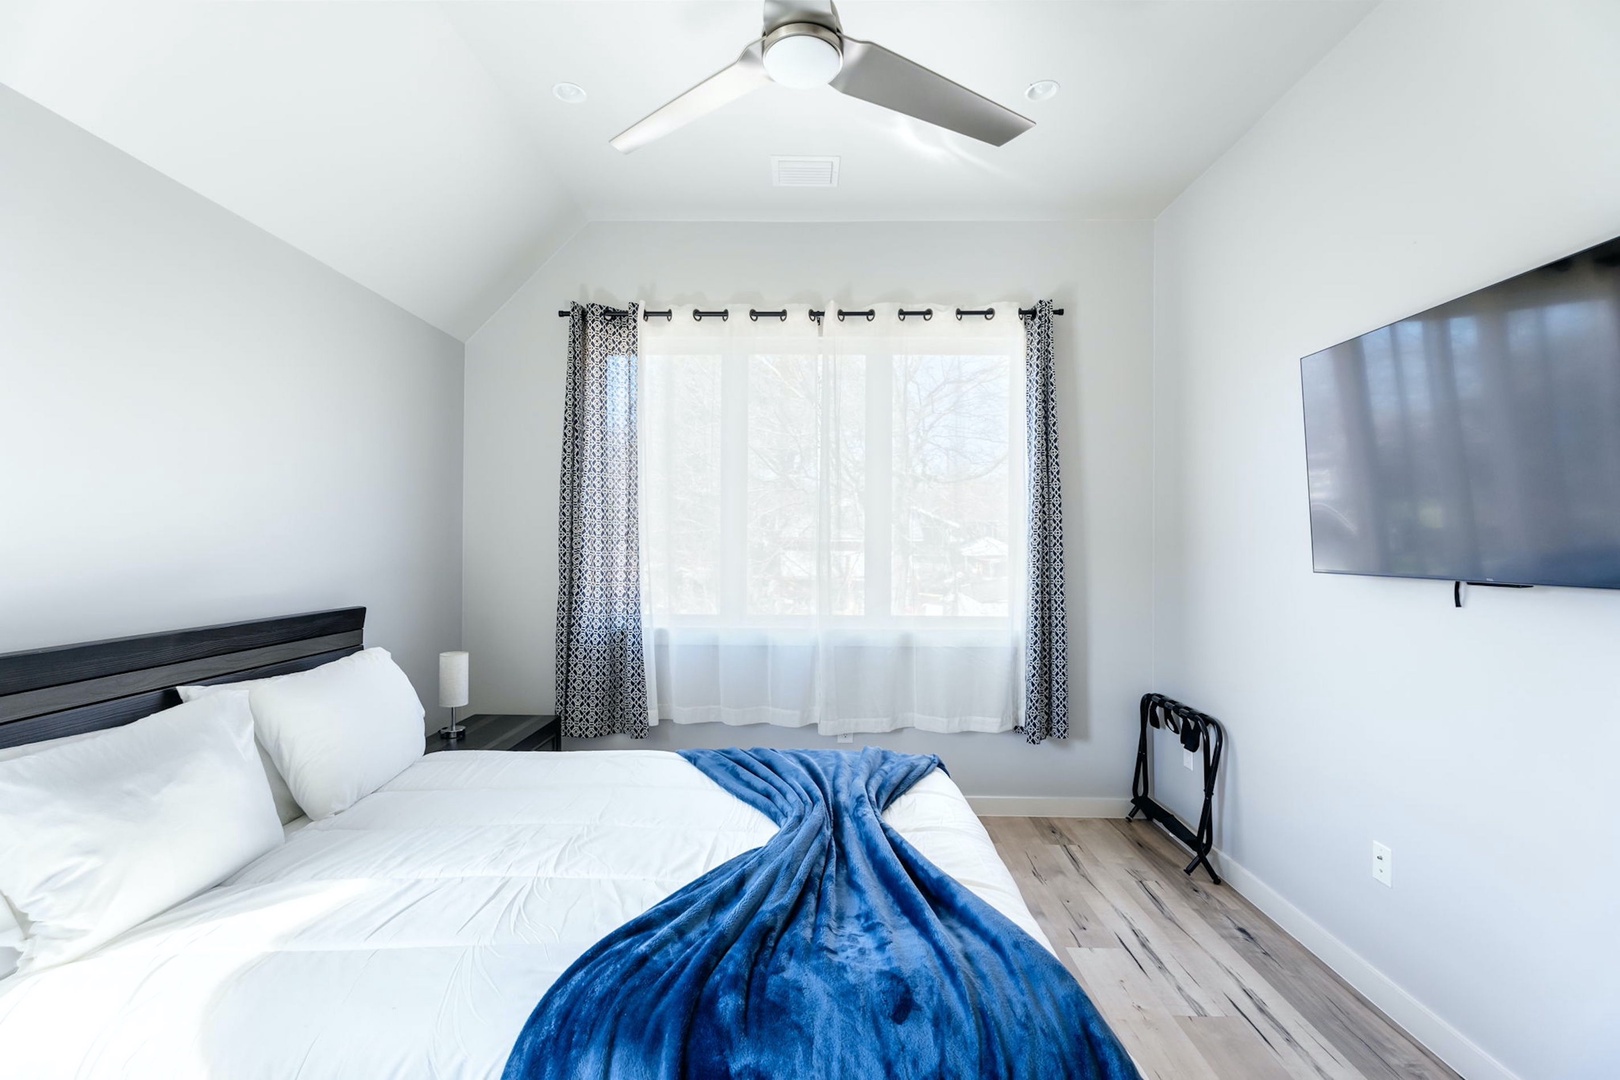 The final bedroom sanctuary includes a plush queen-sized bed & Smart TV